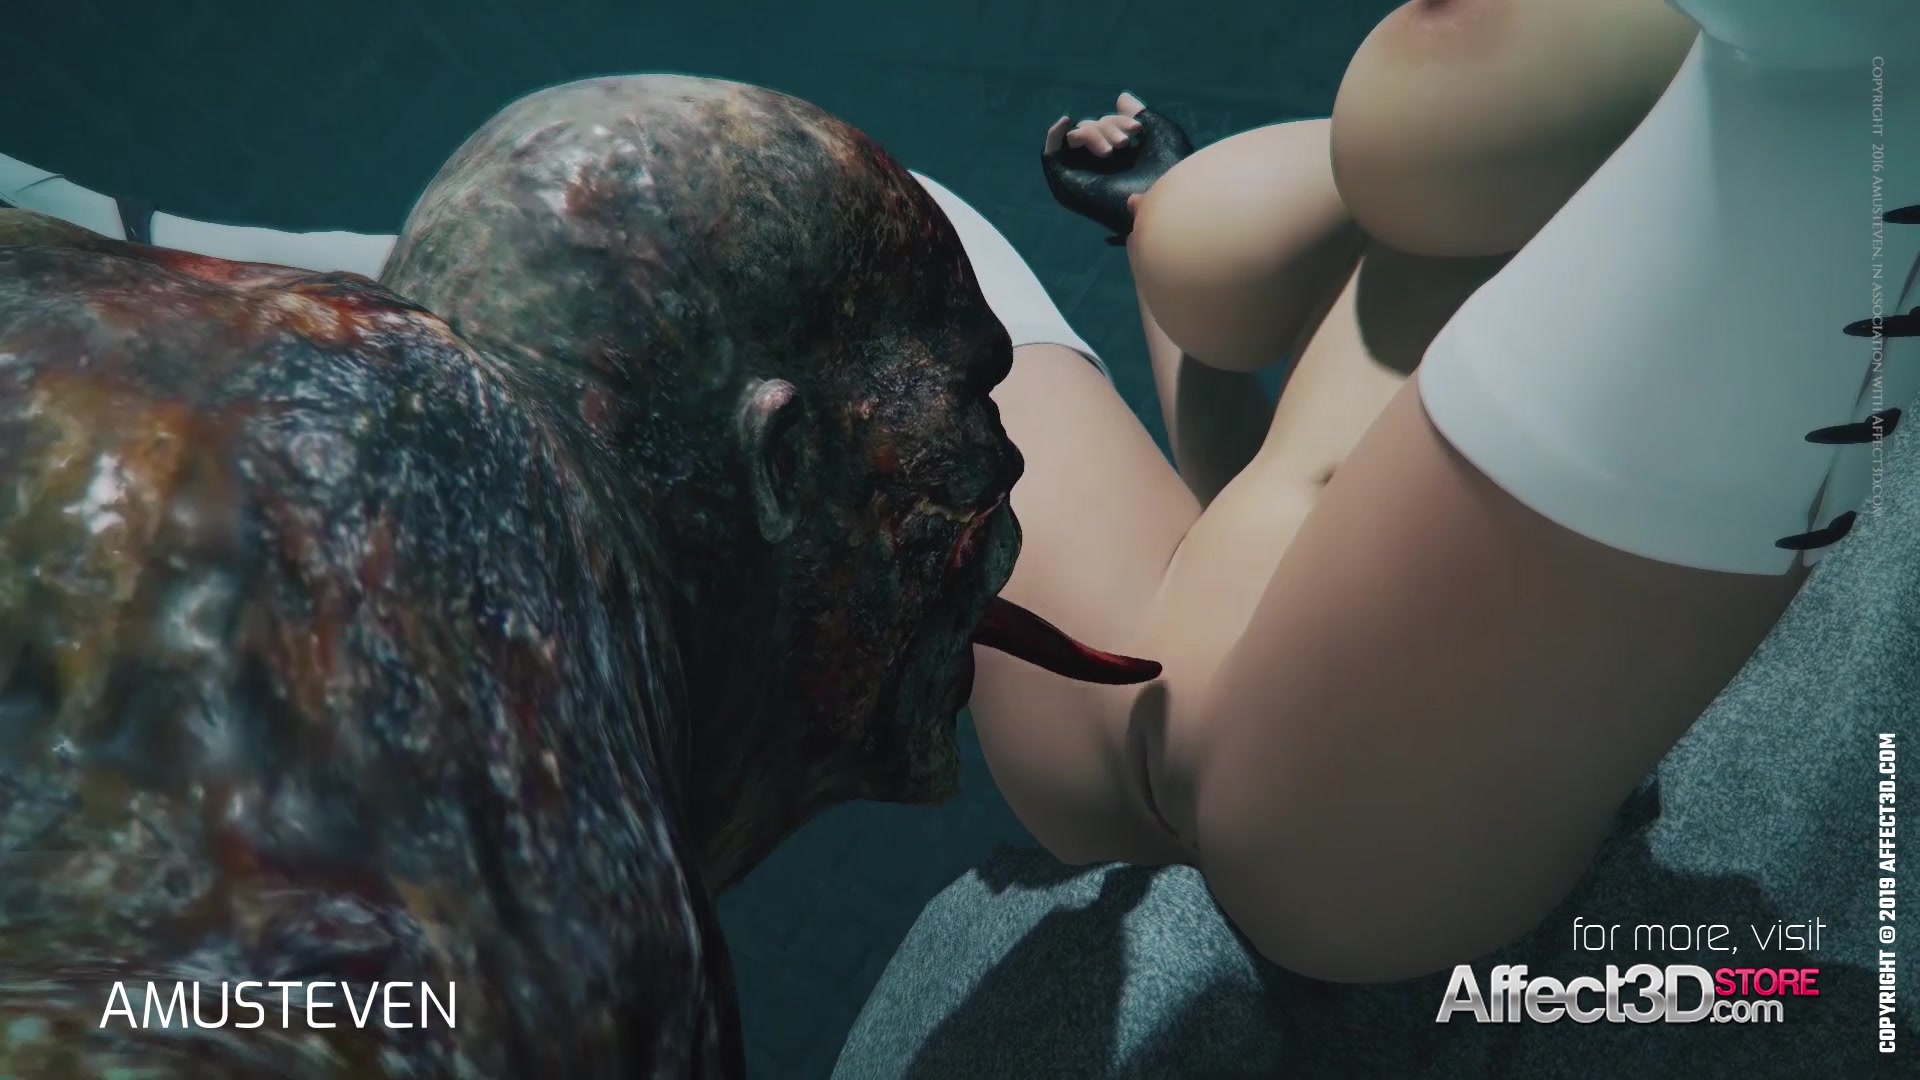 Big Monster - 3d animation monster sex with a redhead big tits babe